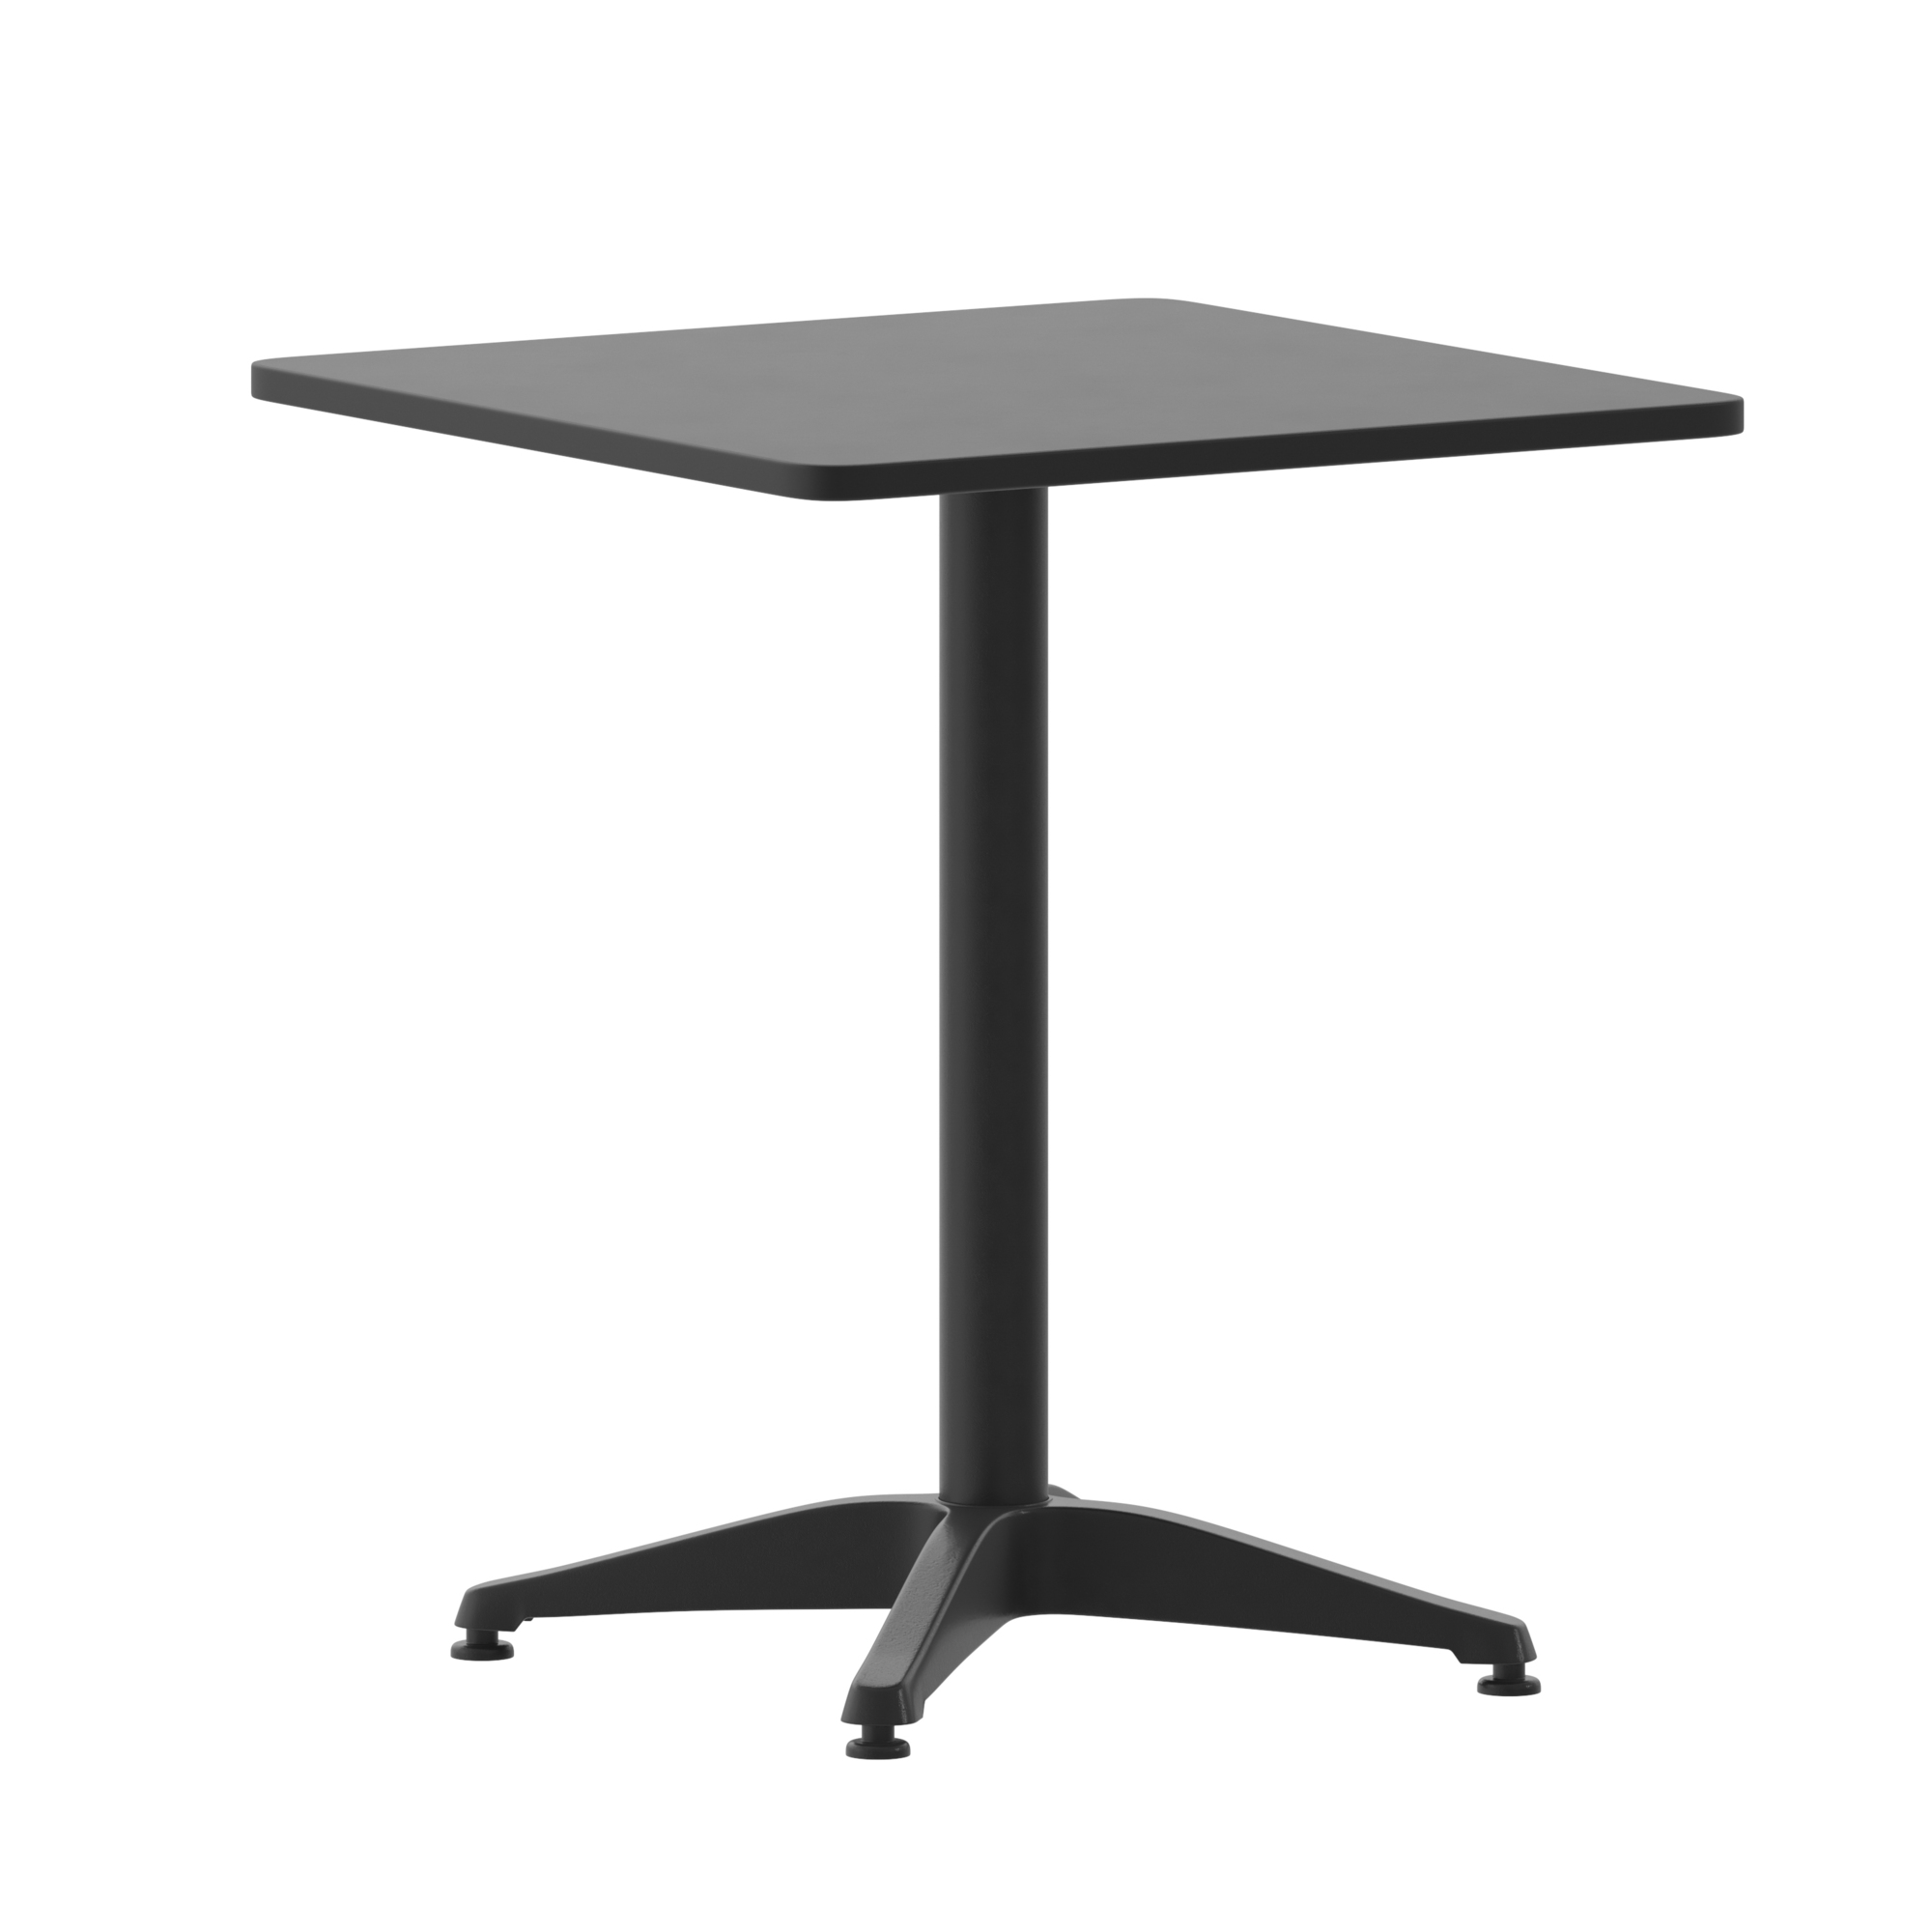 Flash Furniture, 23.5SQ Black Metal Indoor-Outdoor Table w/ Base, Table Shape Square, Primary Color Black, Height 27.5 in, Model TLH0531BK